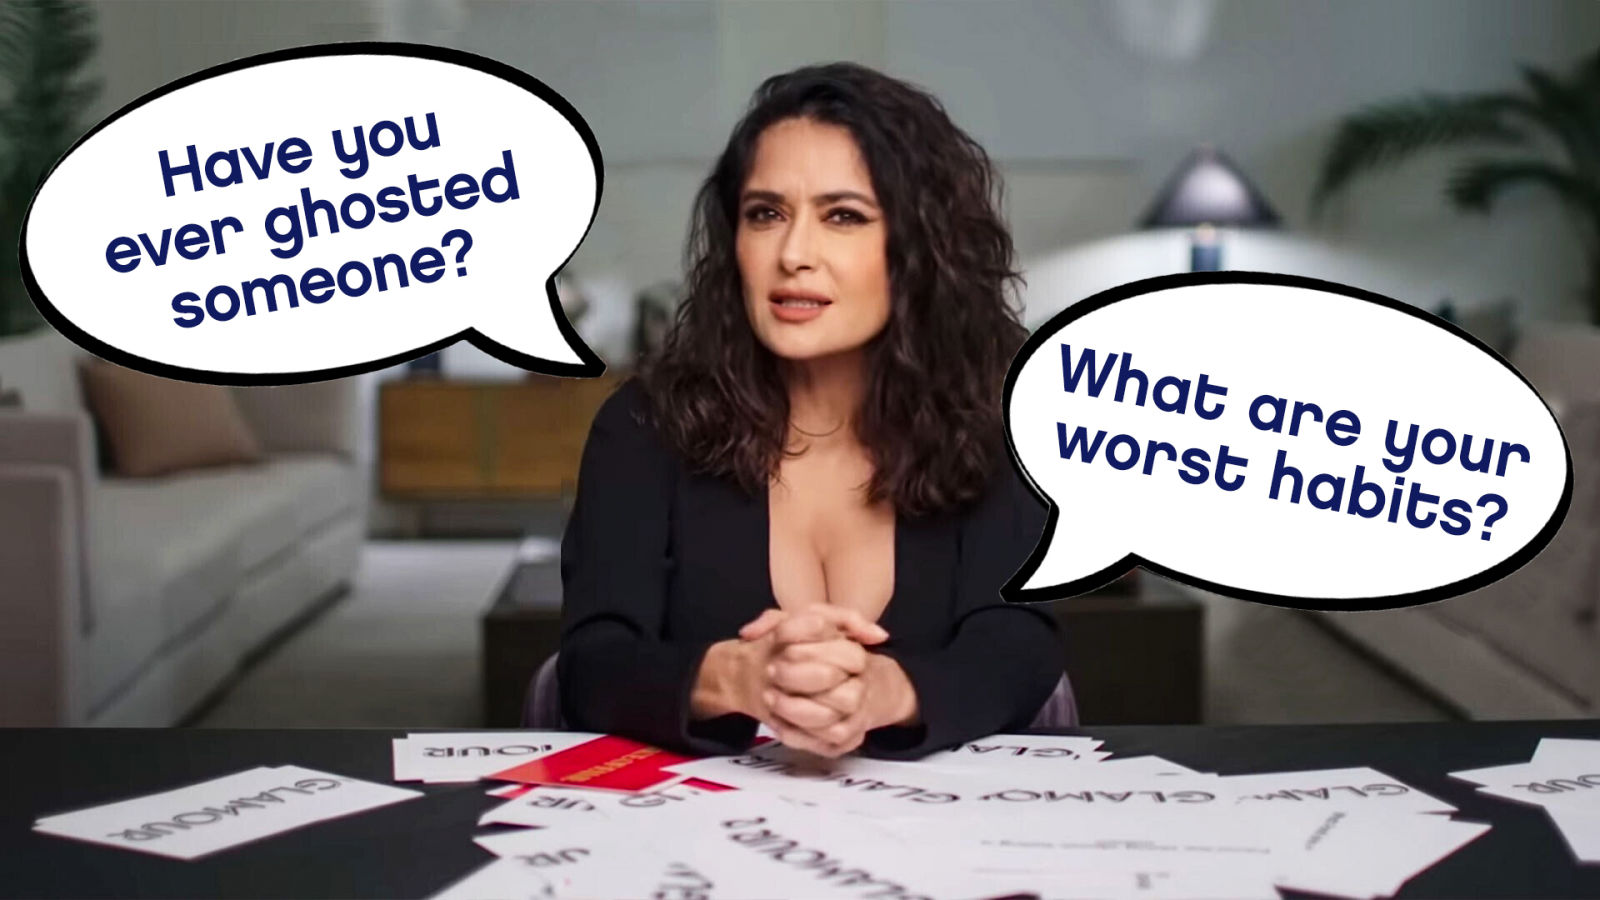 Salma Hayek Pinault Answers WAY Too Many Questions